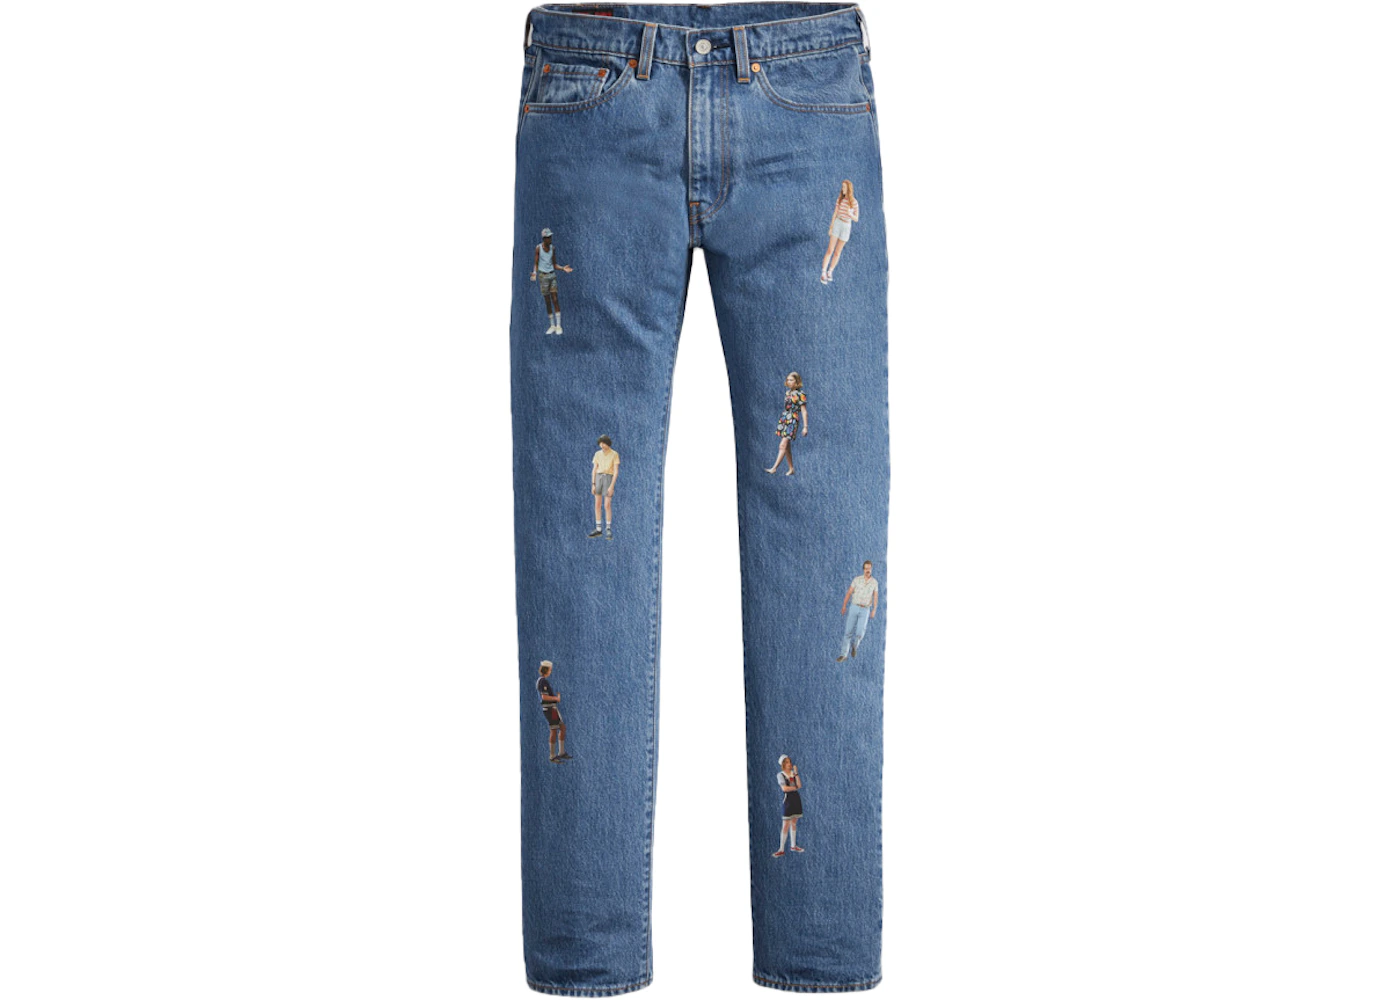 stereo old limbs Levis x Stranger Things 505 Regular Fit Jeans Blue - SS19 Men's - US